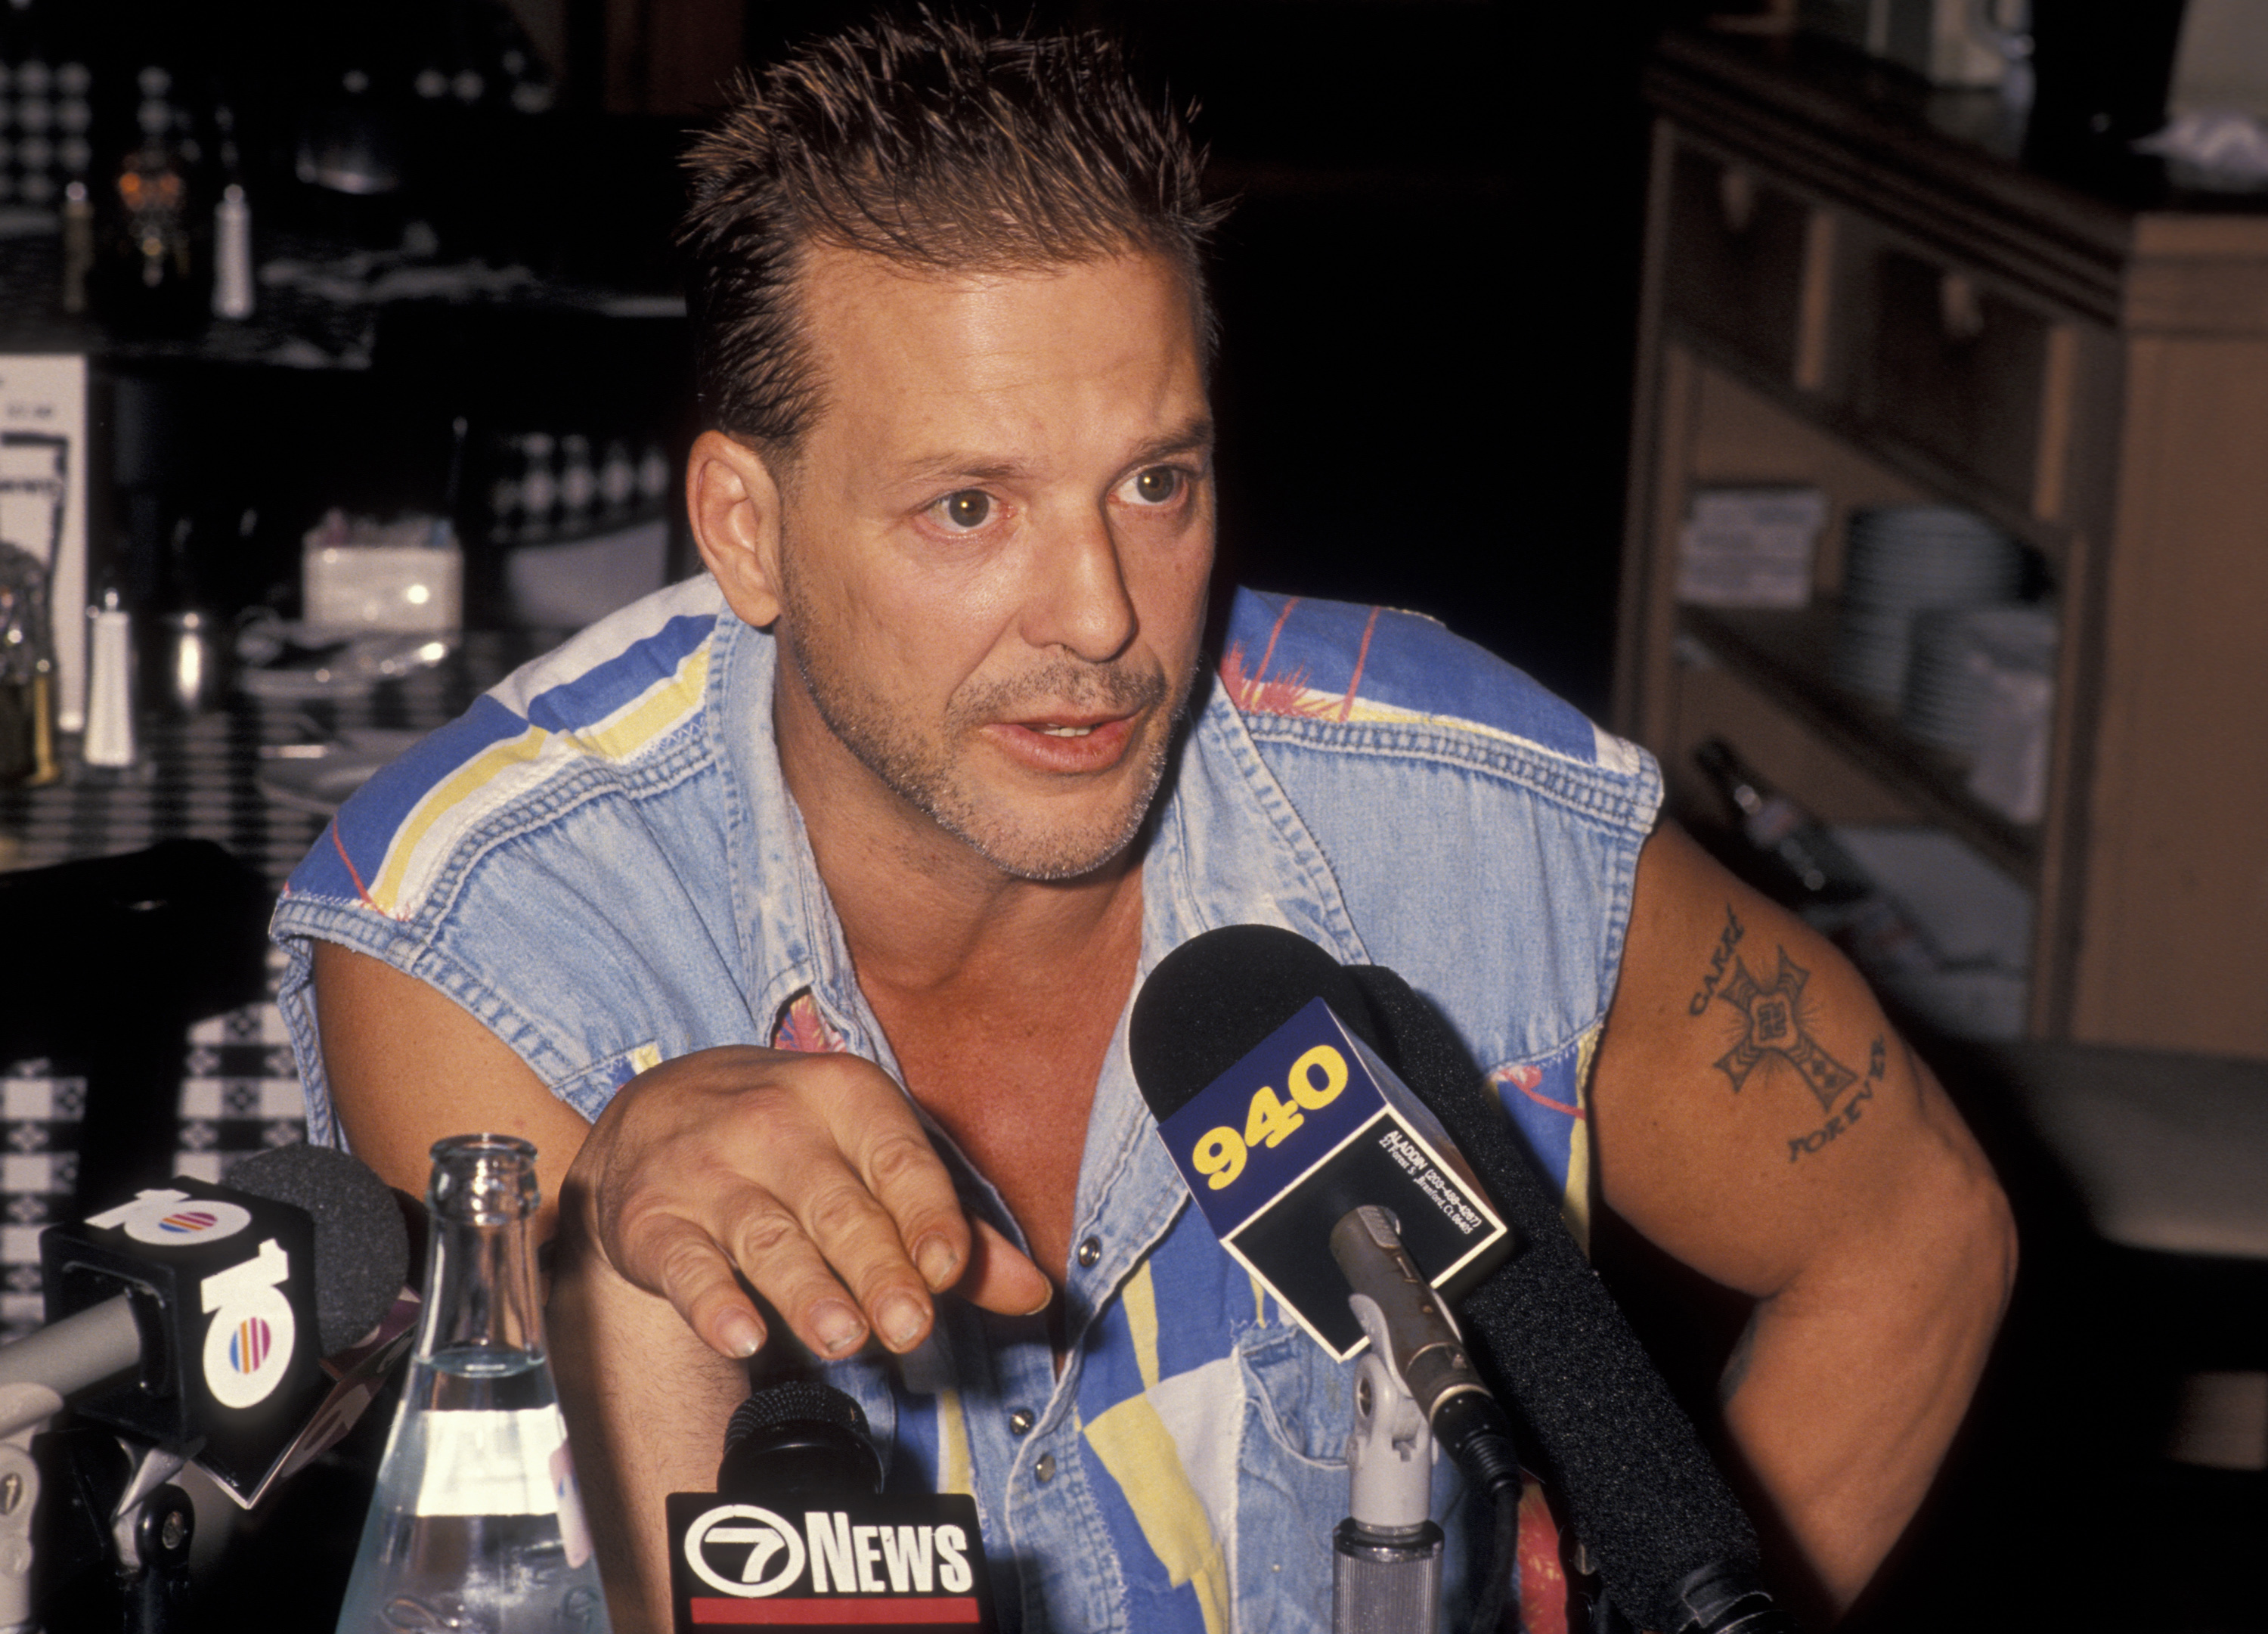 Mickey Rourke at the "Grand Opening of Mickey's Restaurant" on January 7, 1994 in South Beach, Florida. | Source: Getty Images